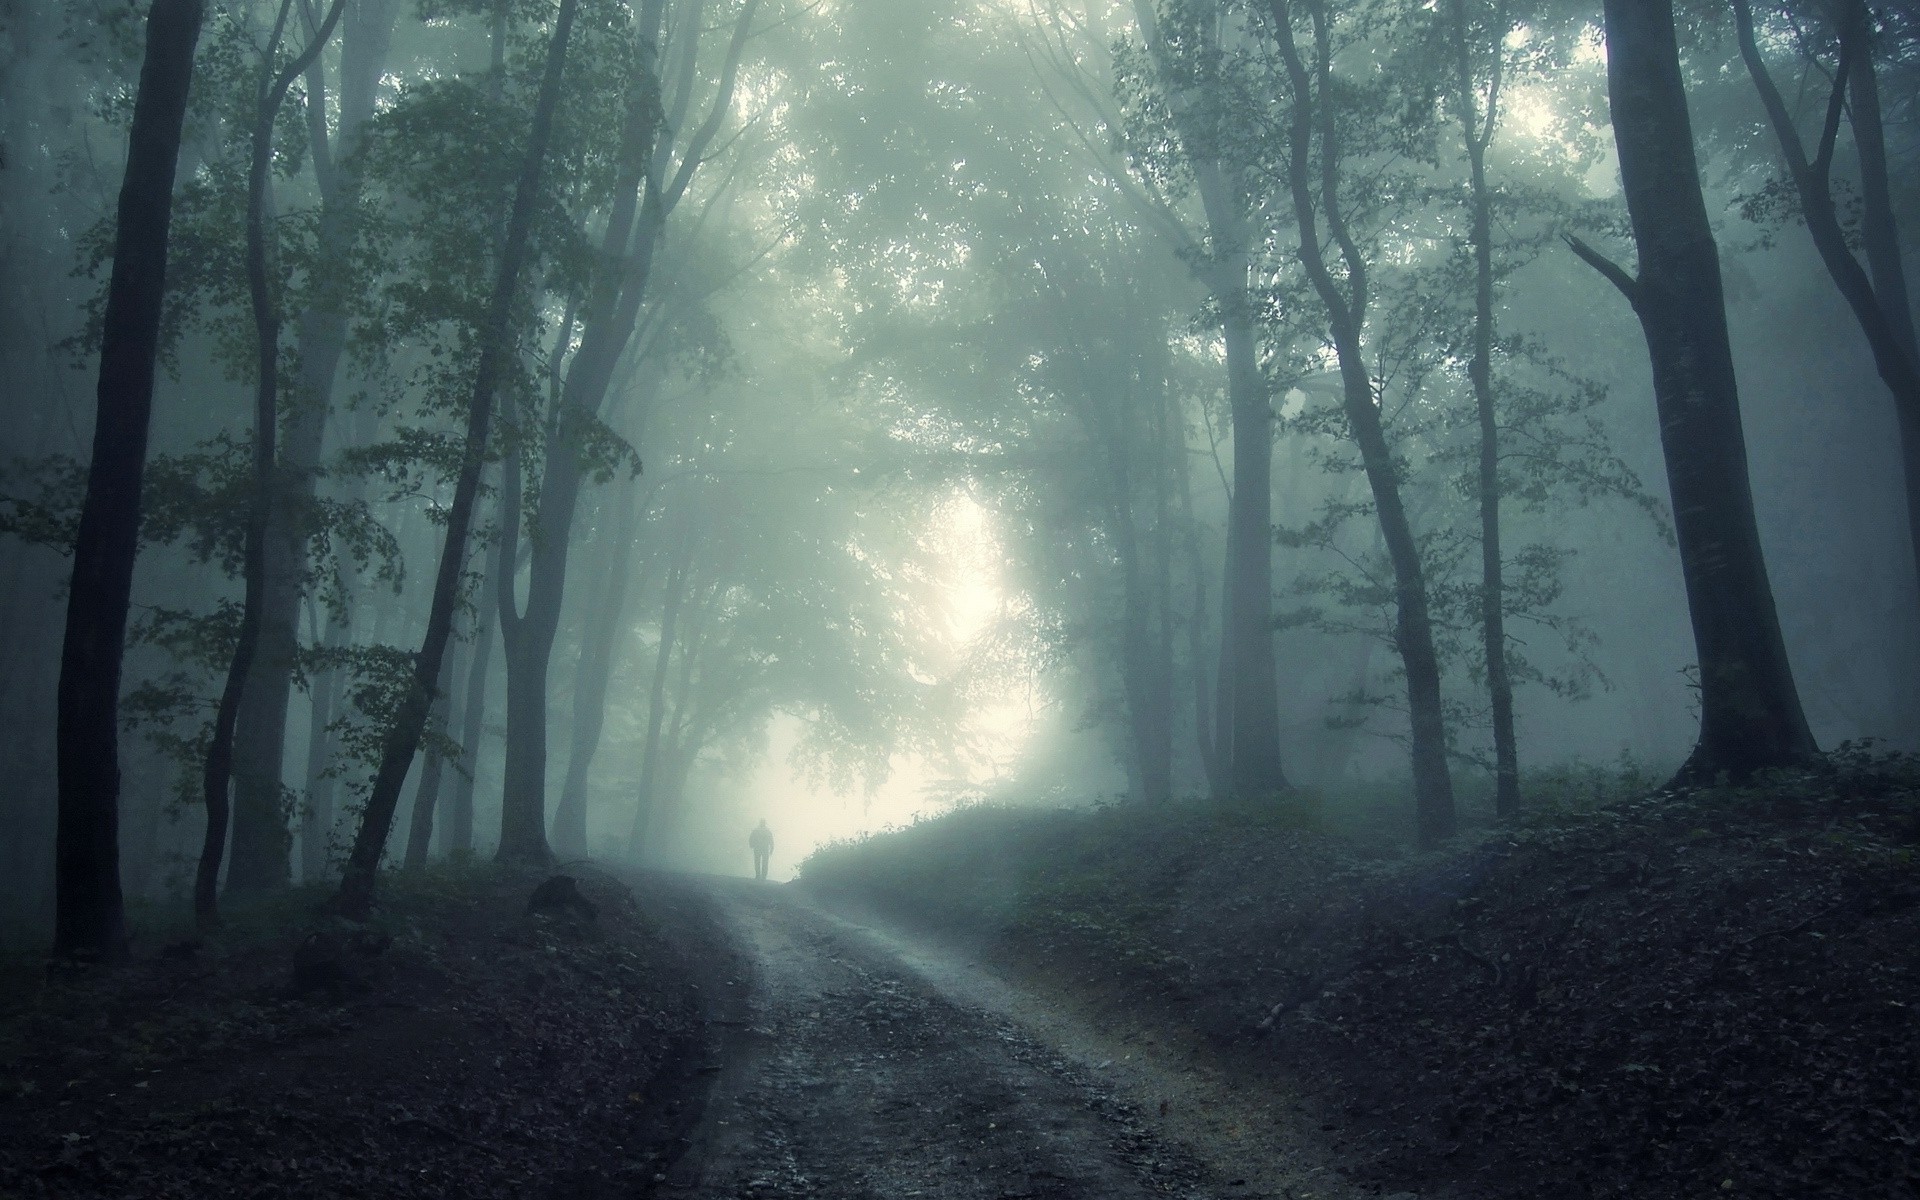 landscapes, nature, trees, wood, forest, silhouette, fog :: Wallpapers